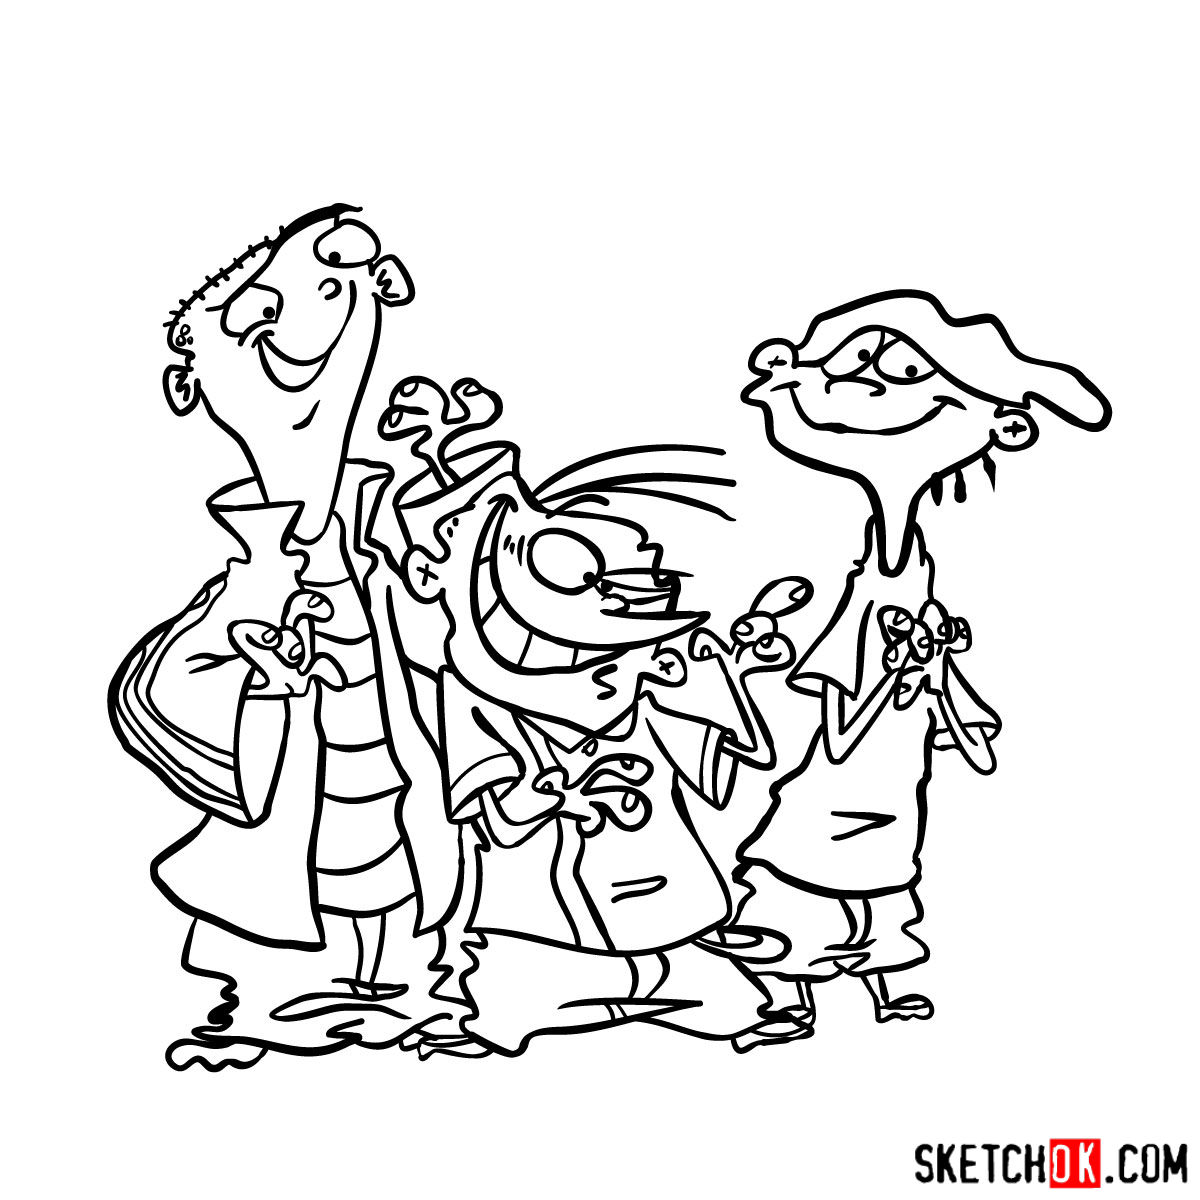 How to draw Ed, Edd and Eddy together - step 31